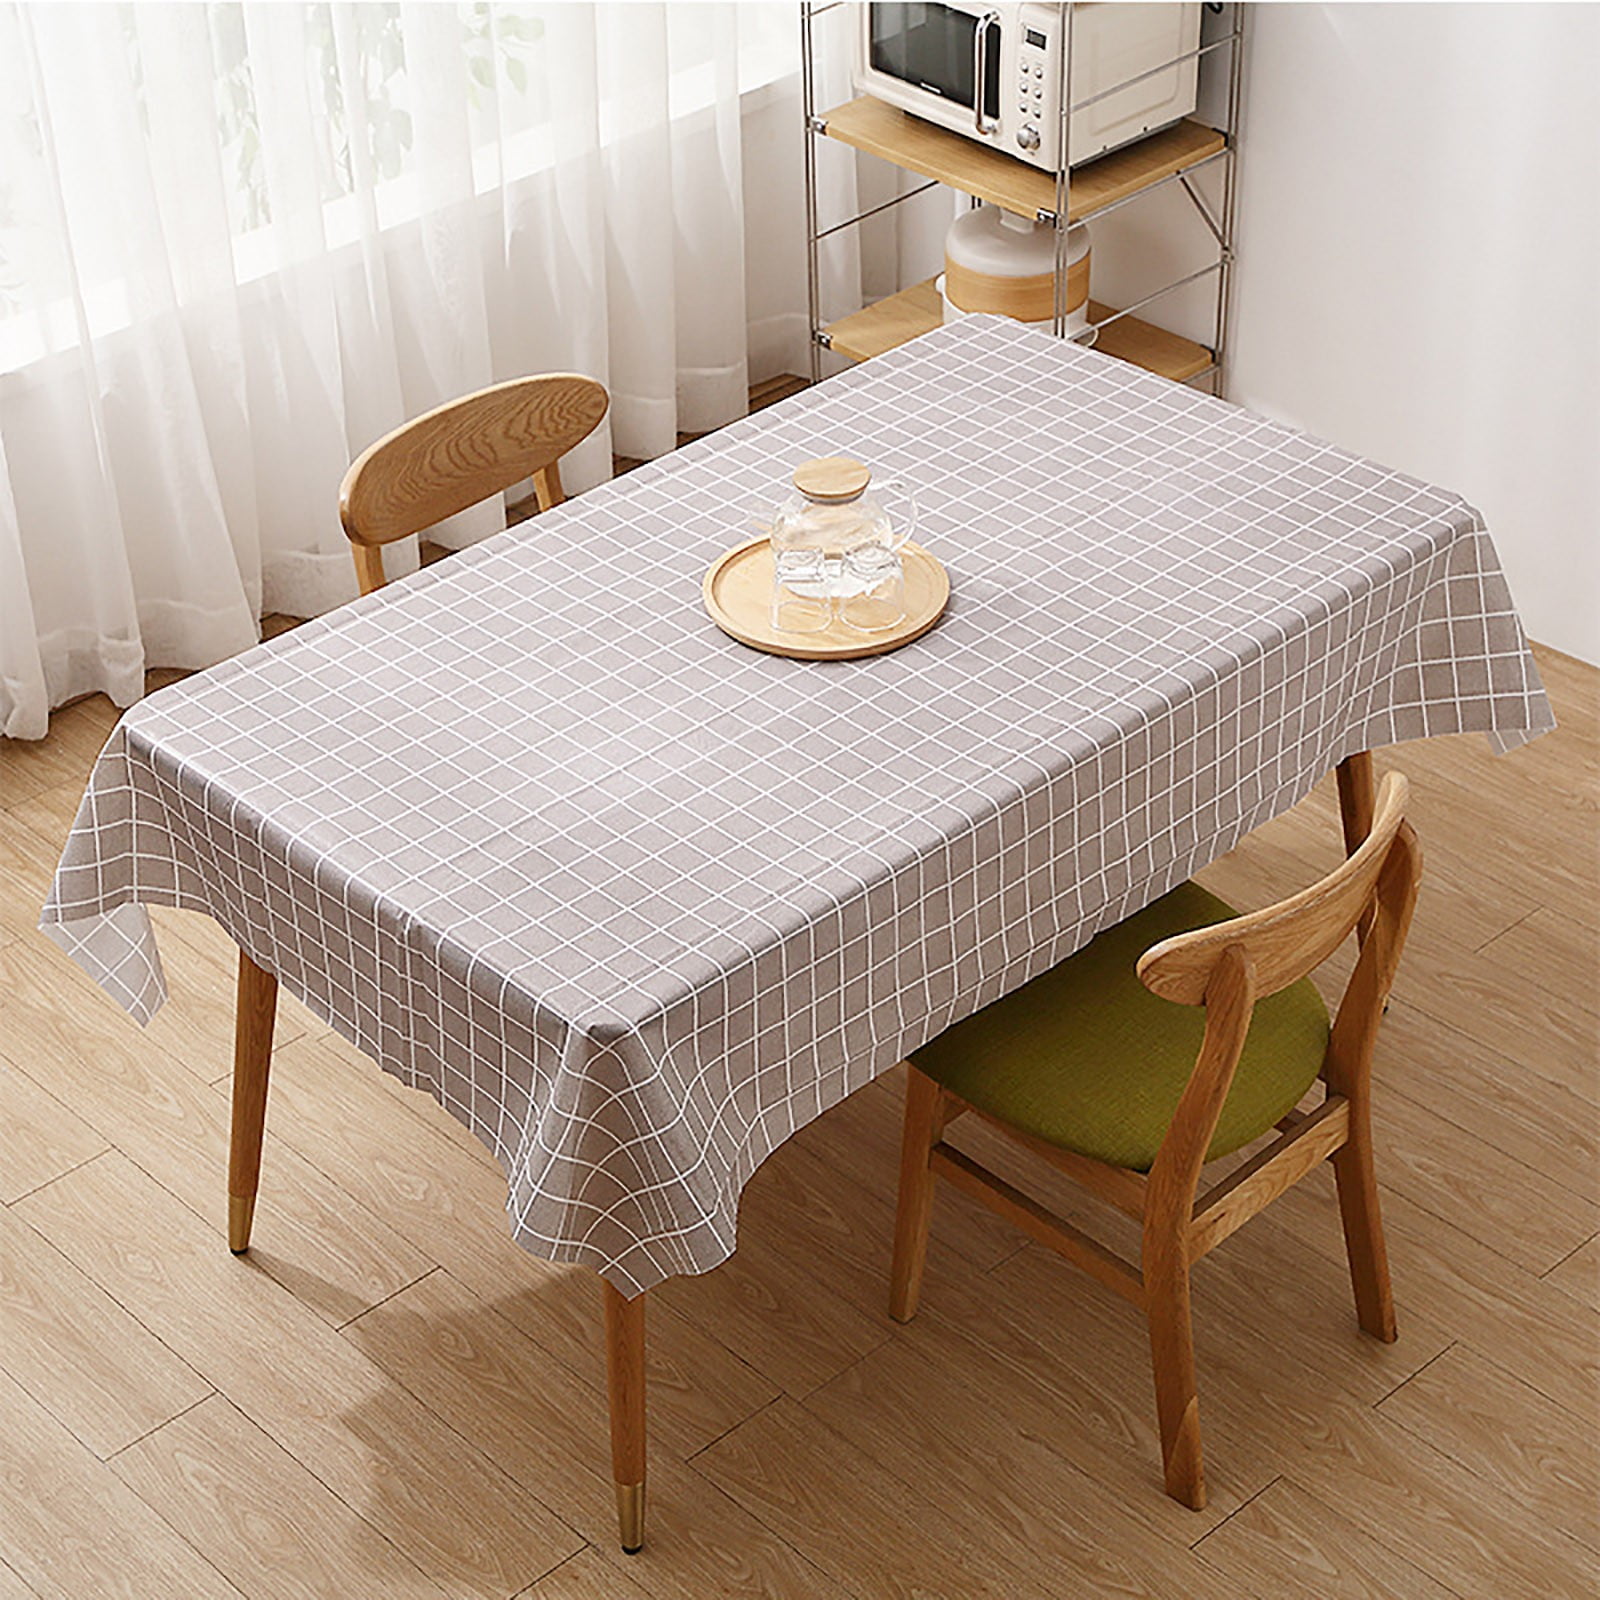 Black and White Picnic Camping Party Supply Table Cover for Birthdays 8 Packs Plastic Disposable Vinyl Party Tablecloths Gatherings BBQ Plastic Black and White Checkered Tablecloths Holidays 